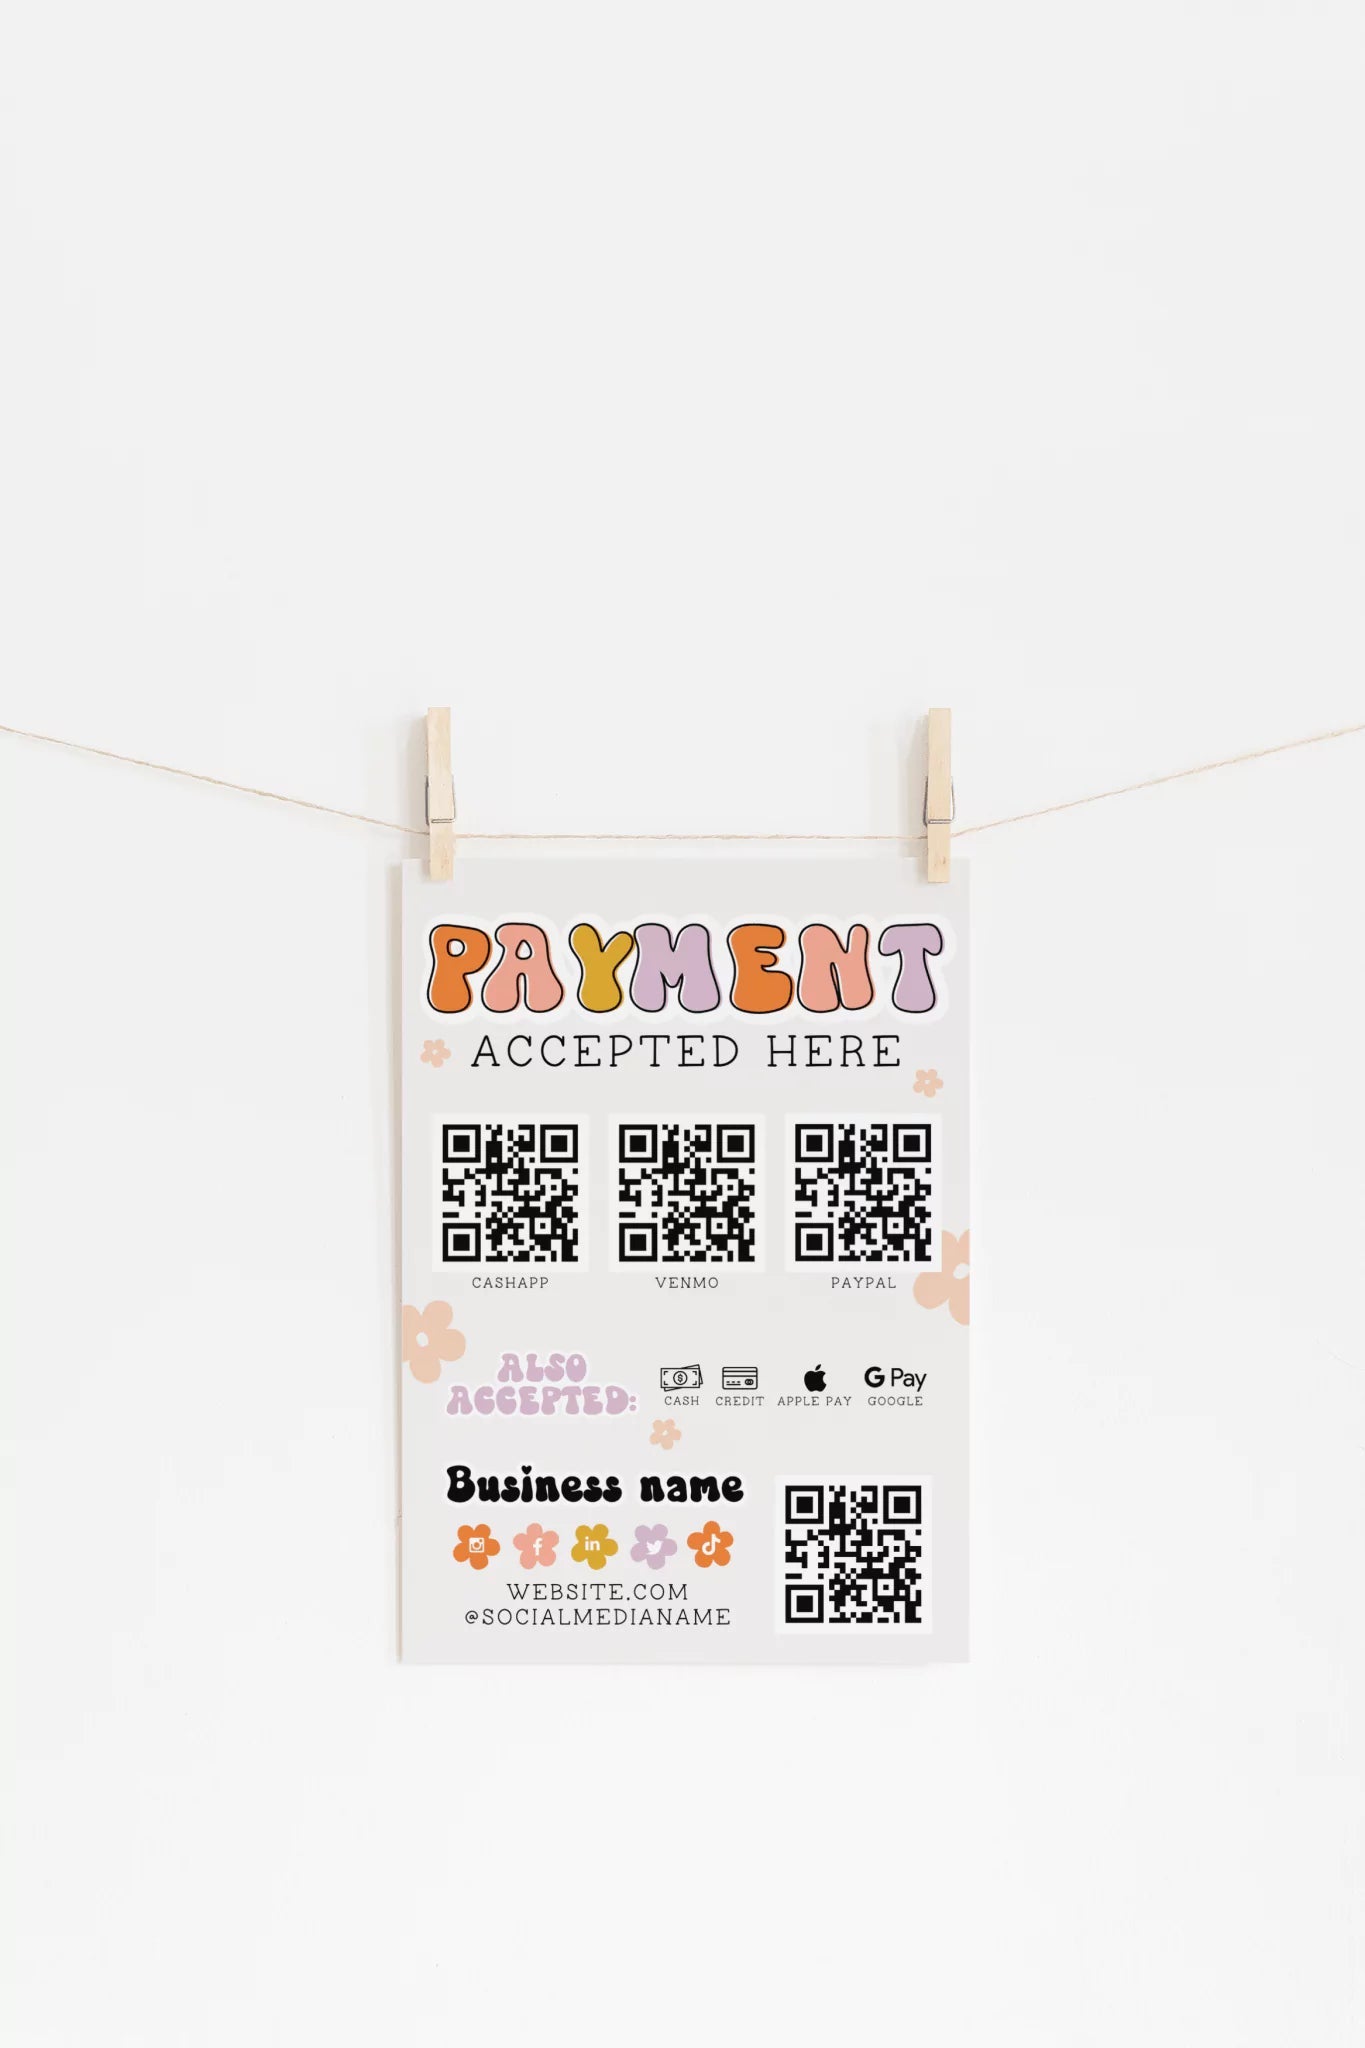 Rainbow Retro Scan to Pay Sign, Accepted Payments Sign Canva Template | Birdie - Trendy Fox Studio